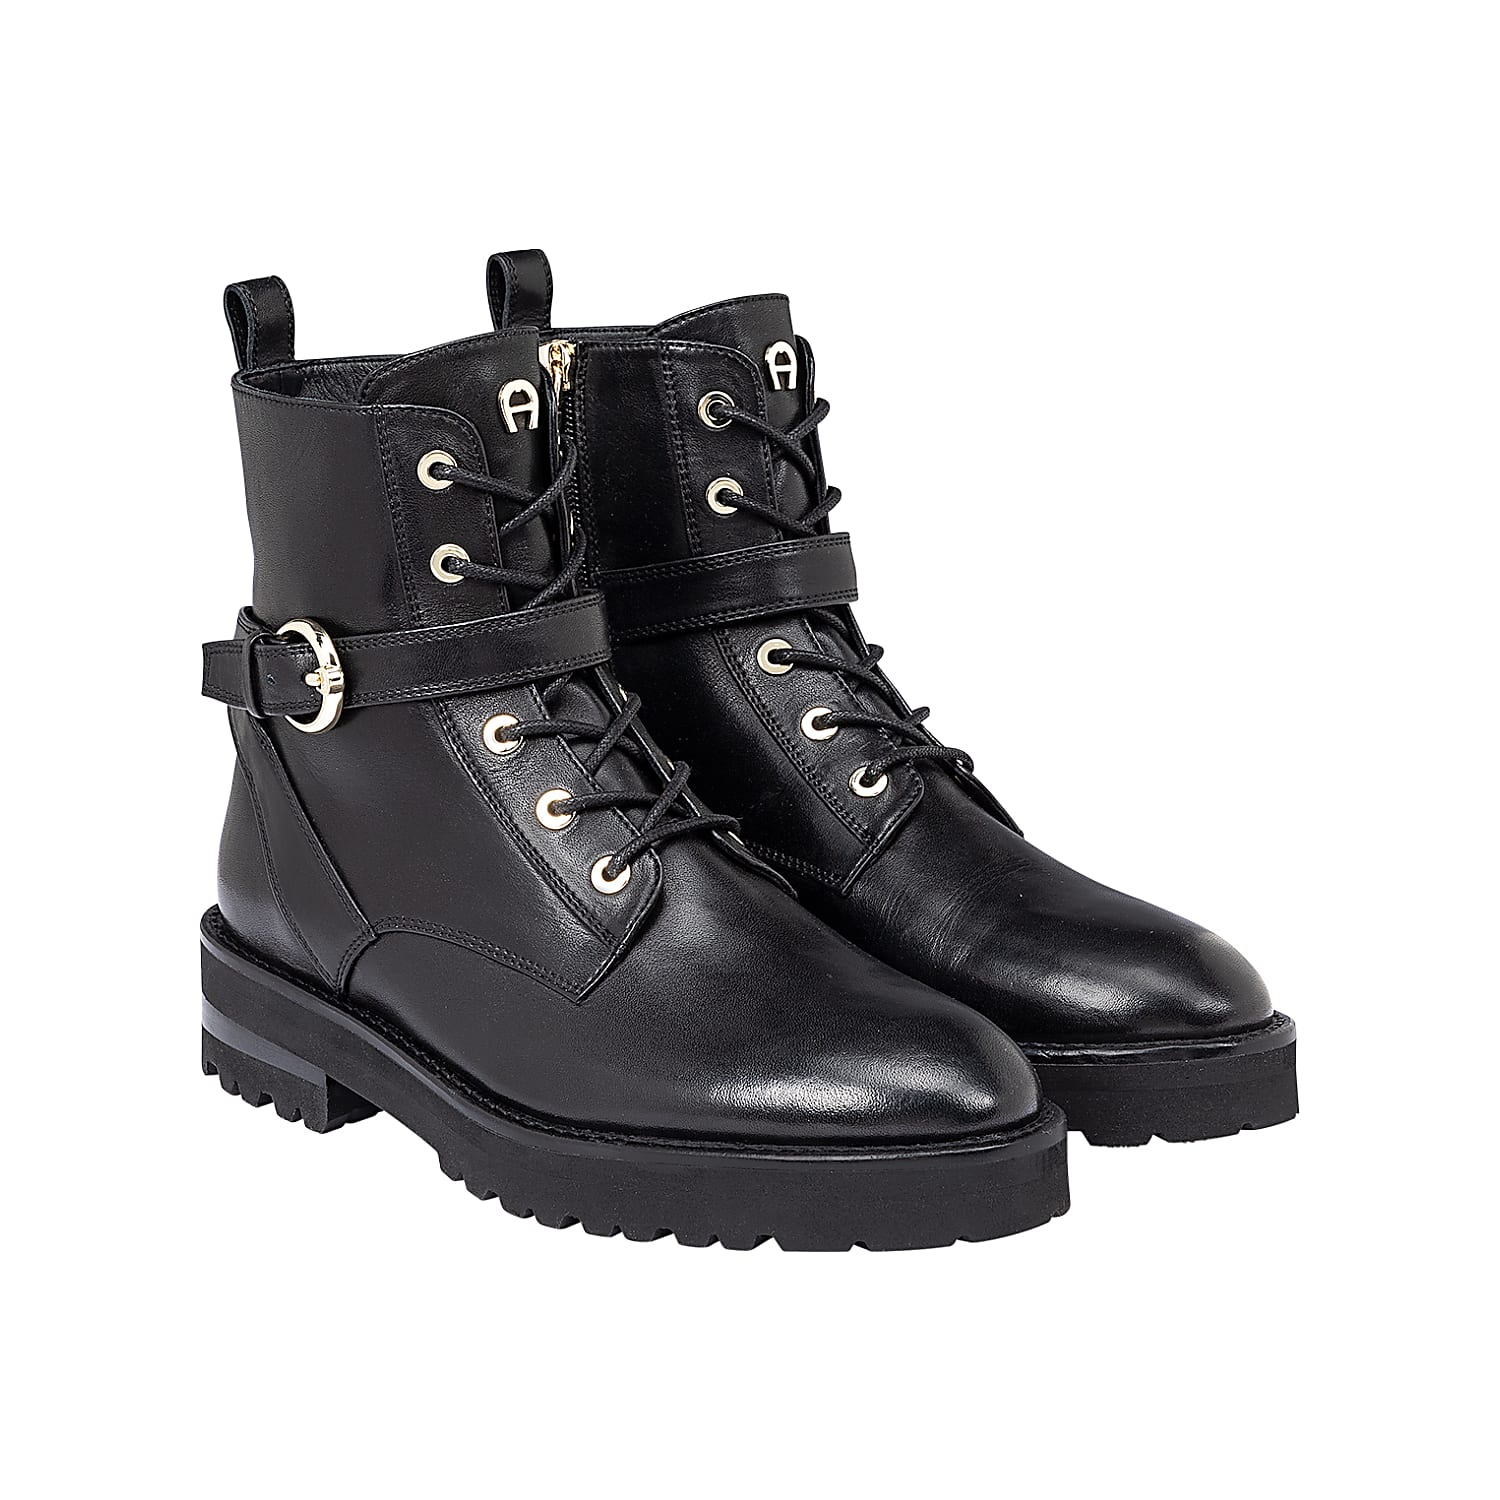 Ava boots with logo buckle